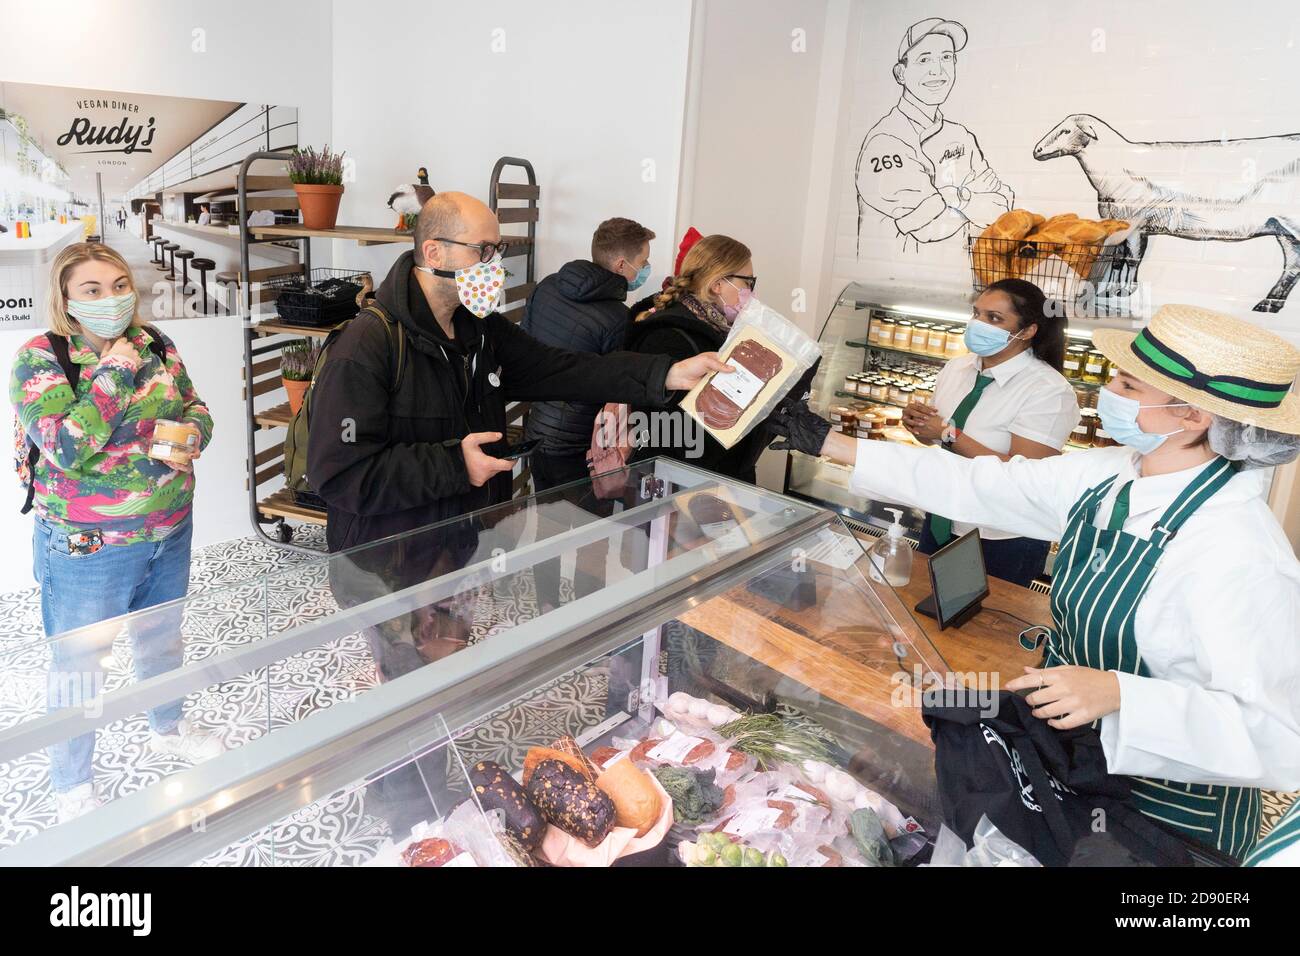 Rudys Vegan Butcher delicatessen opens in Islington London with a sell out day.  Queues formed for an hour before until all the products sold out. Stock Photo